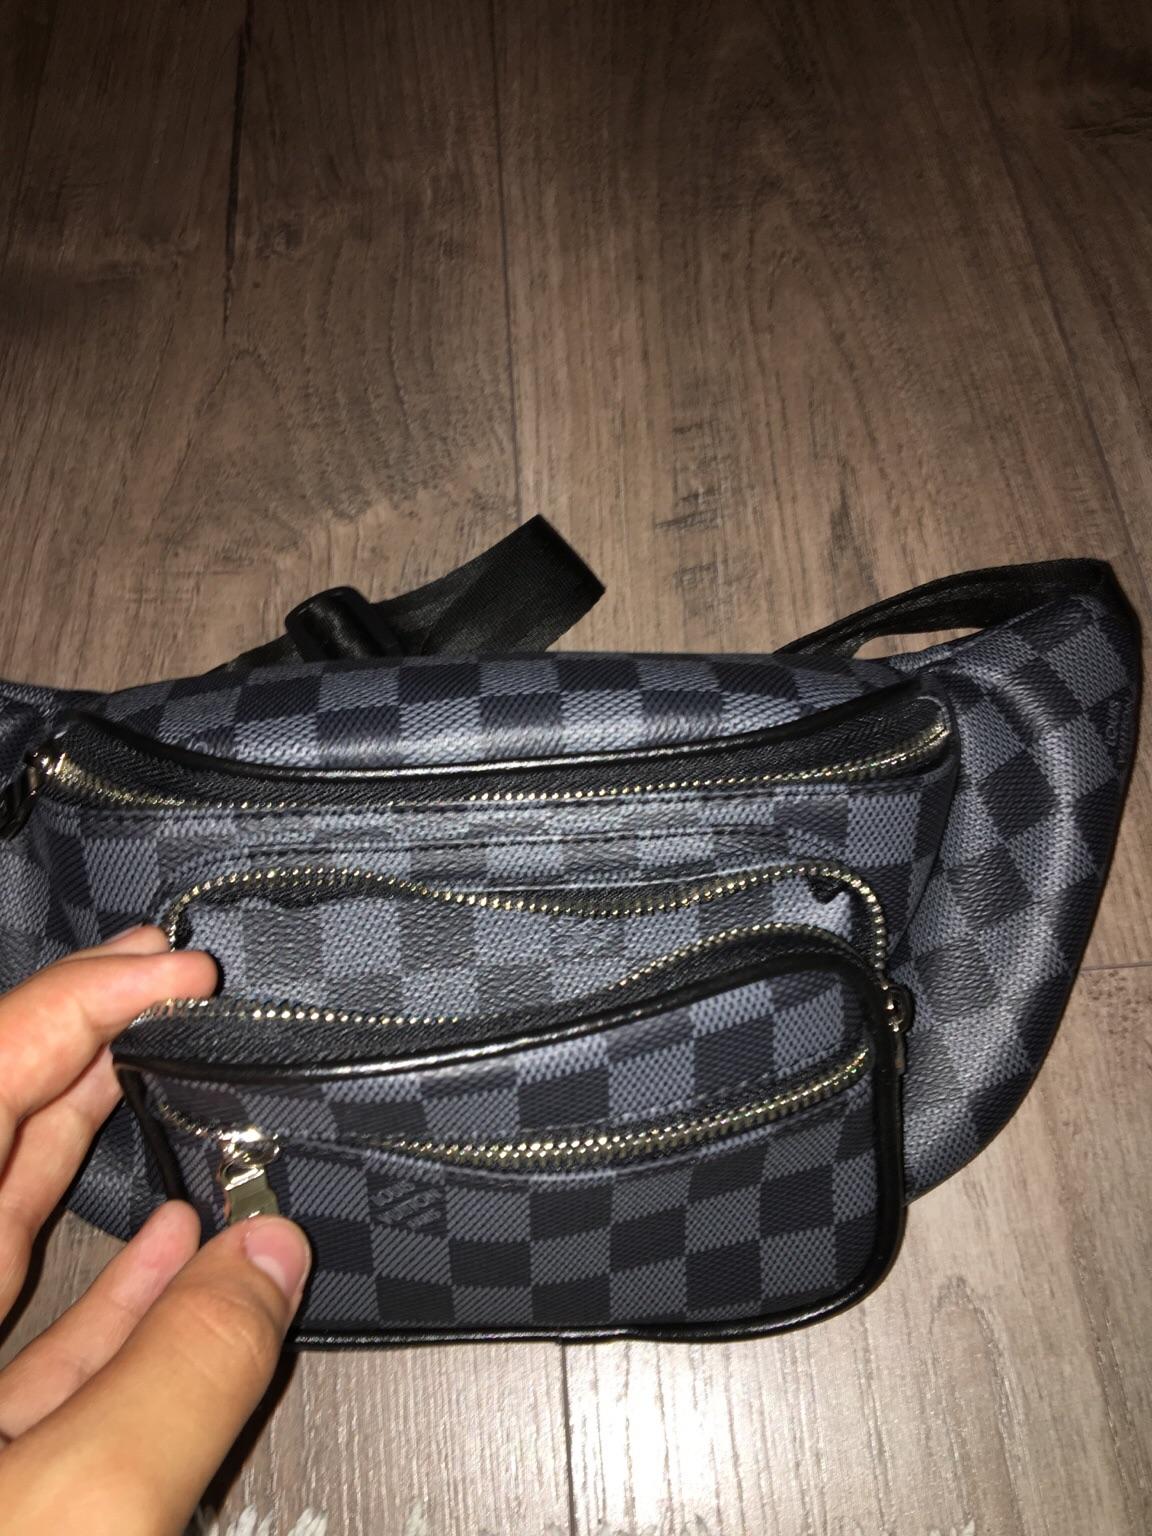 Louis Vuitton bauchtasche in 42119 Wuppertal for €35.00 for sale